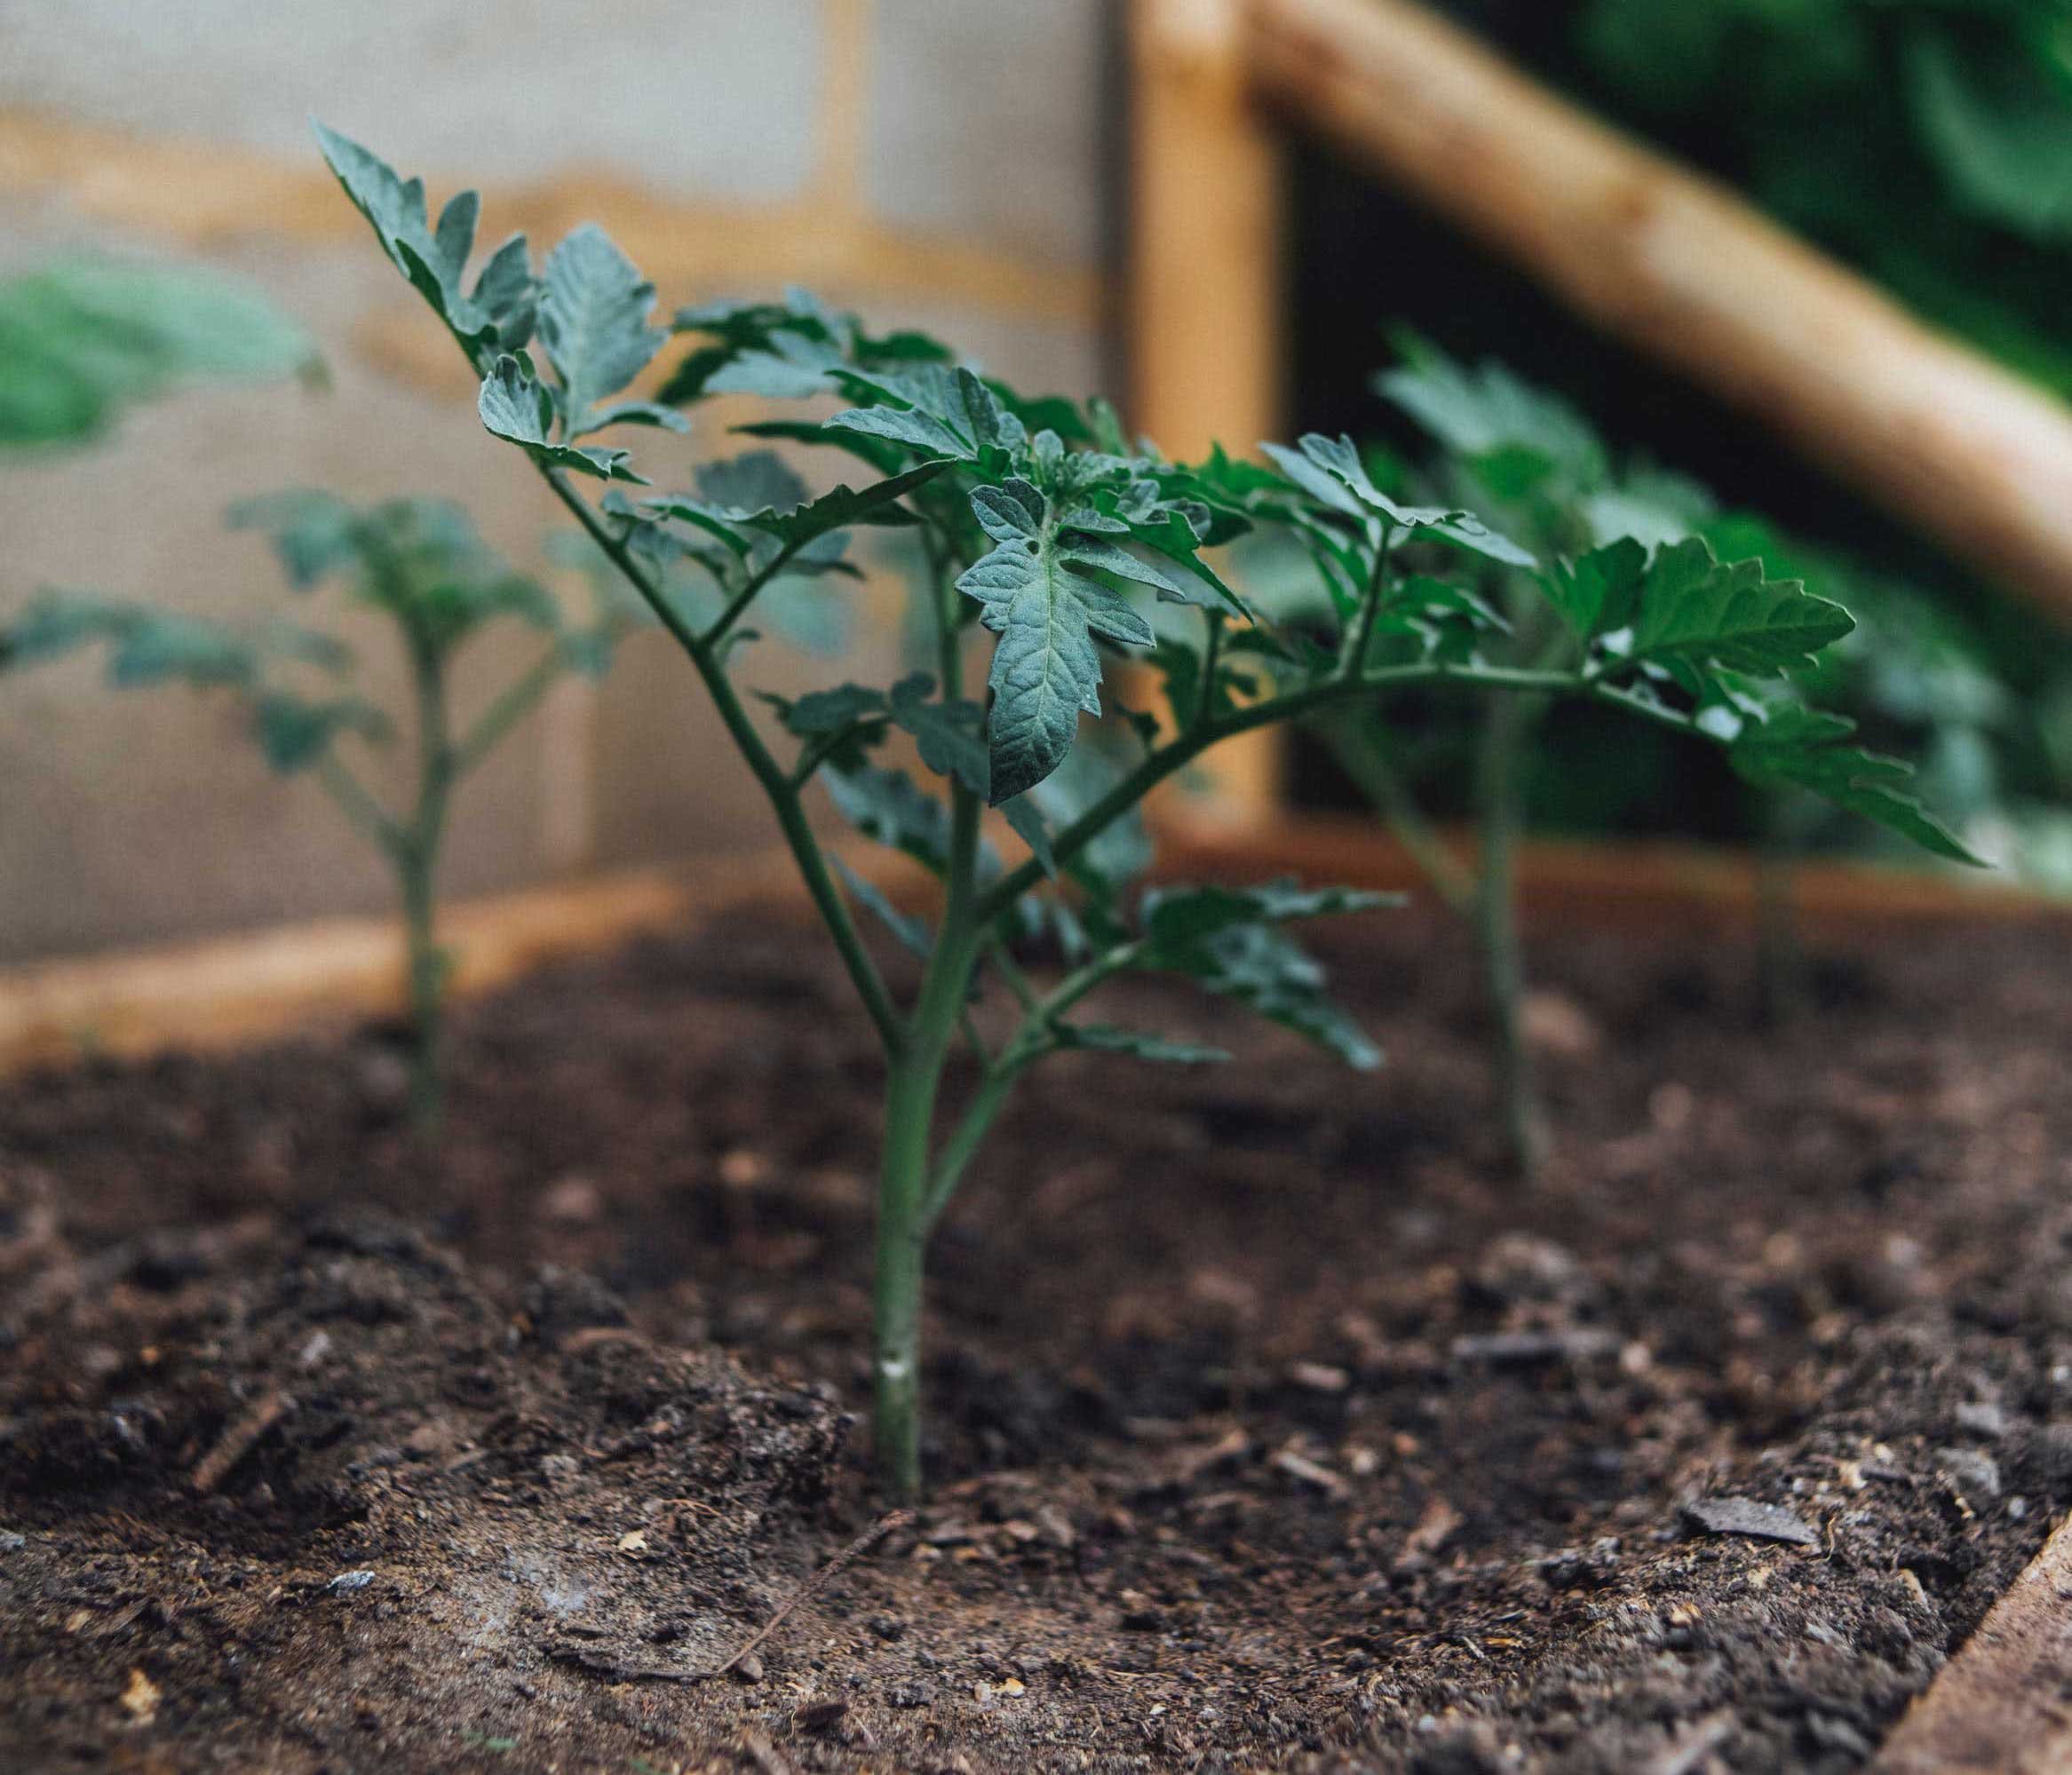 A freshly planted tomato plant